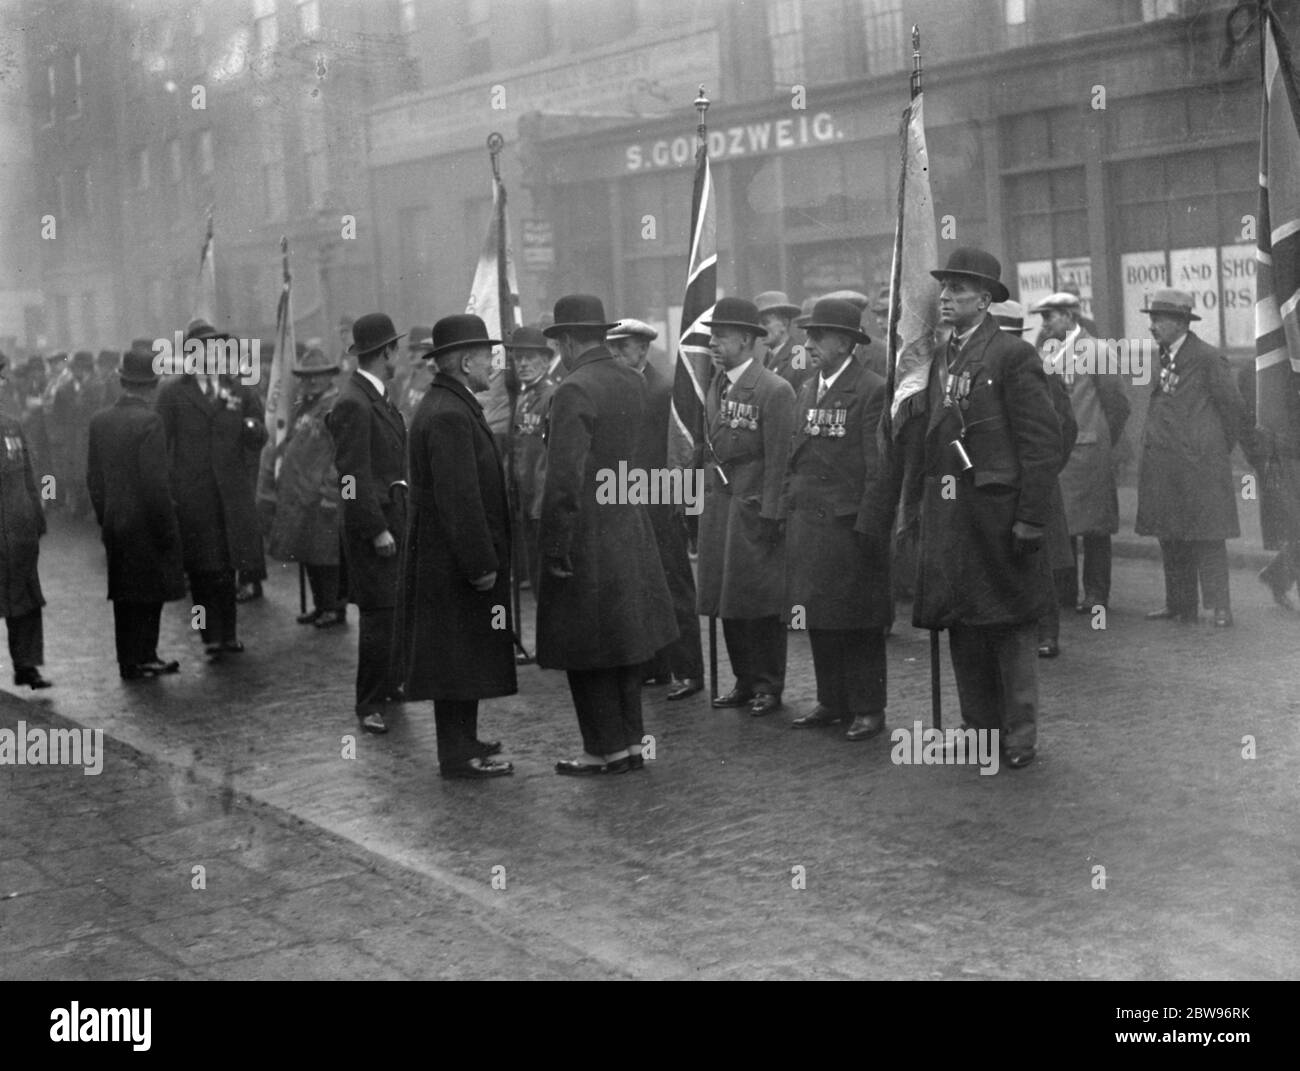 Aldgate old comrades association standard dedication . The Aldgate Old Comrades association standard was dedicated at St Johns Church Aldgate , London . Major E Edwards ( left ) talking to members of the old comrades association at the parade . 14 February 1932 Stock Photo